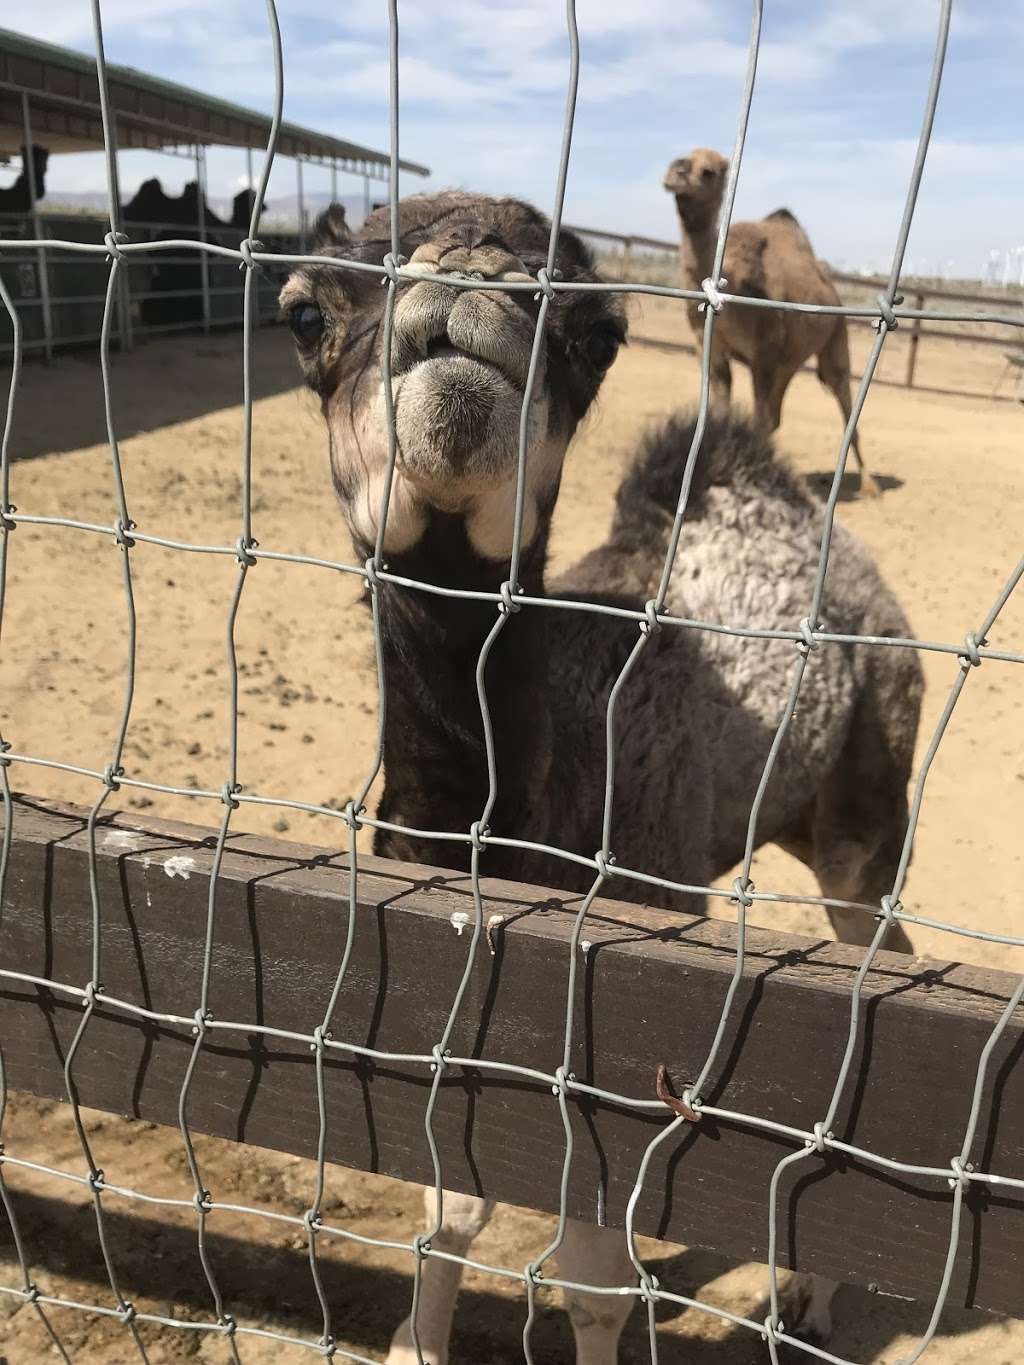 Windswept Ranch Petting Zoo | 11101 Robert Ranch Rd, Willow Springs, CA 93560 | Phone: (661) 809-3965